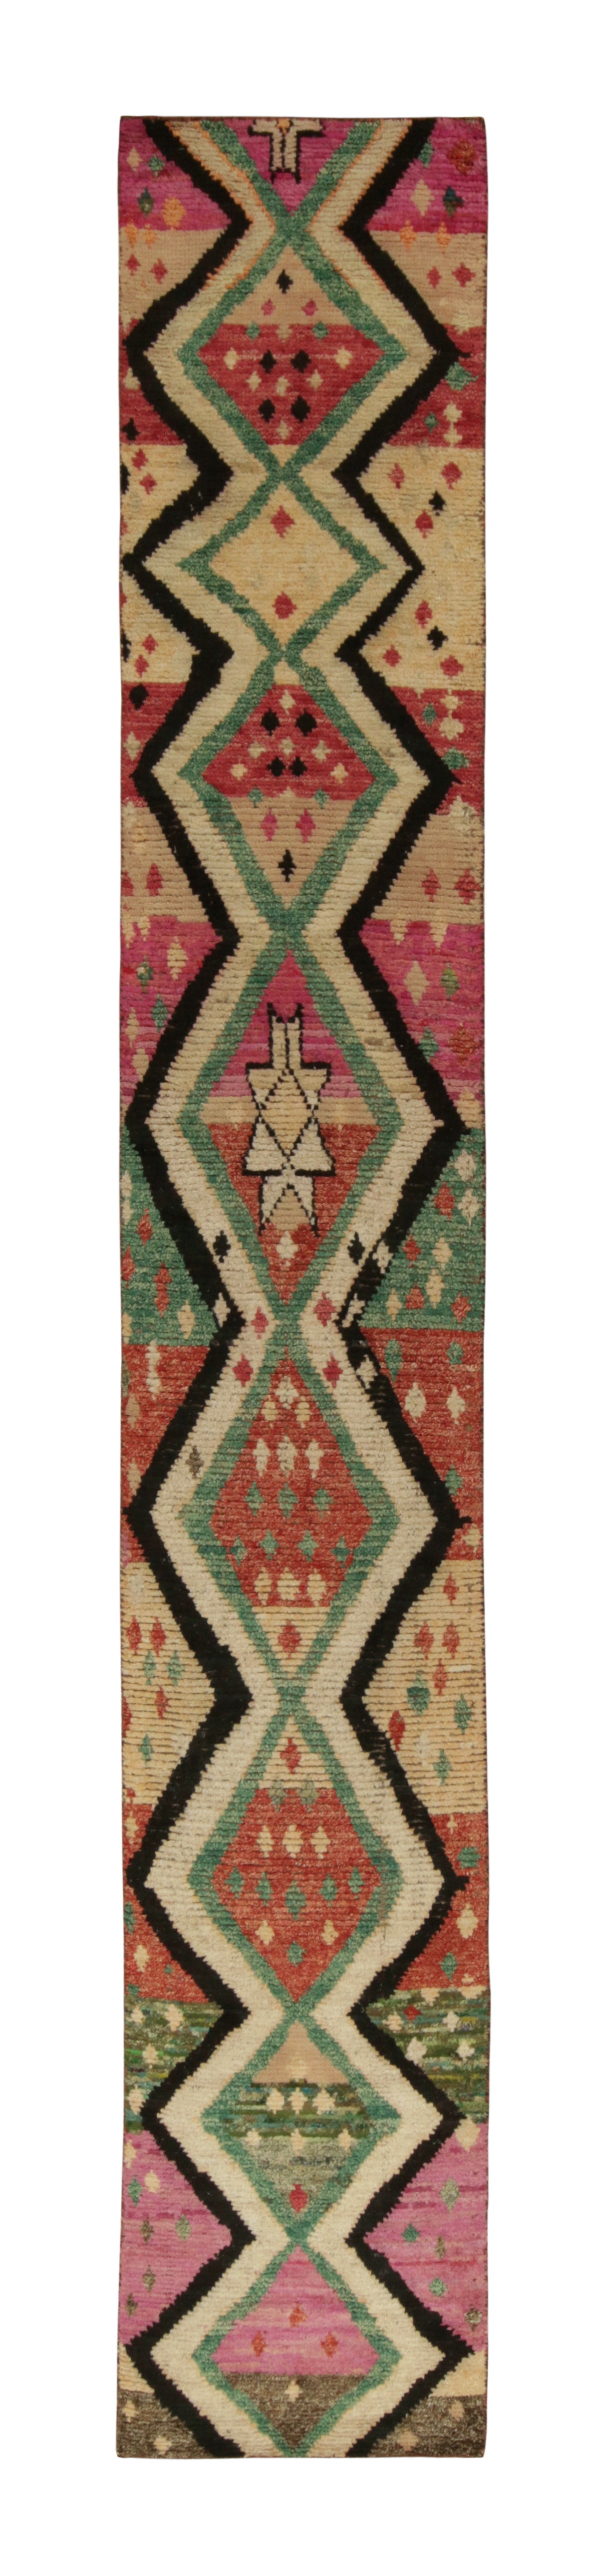 Rug & Kilim’s Moroccan Style Runner in Multicolor Tribal Geometric Pattern For Sale